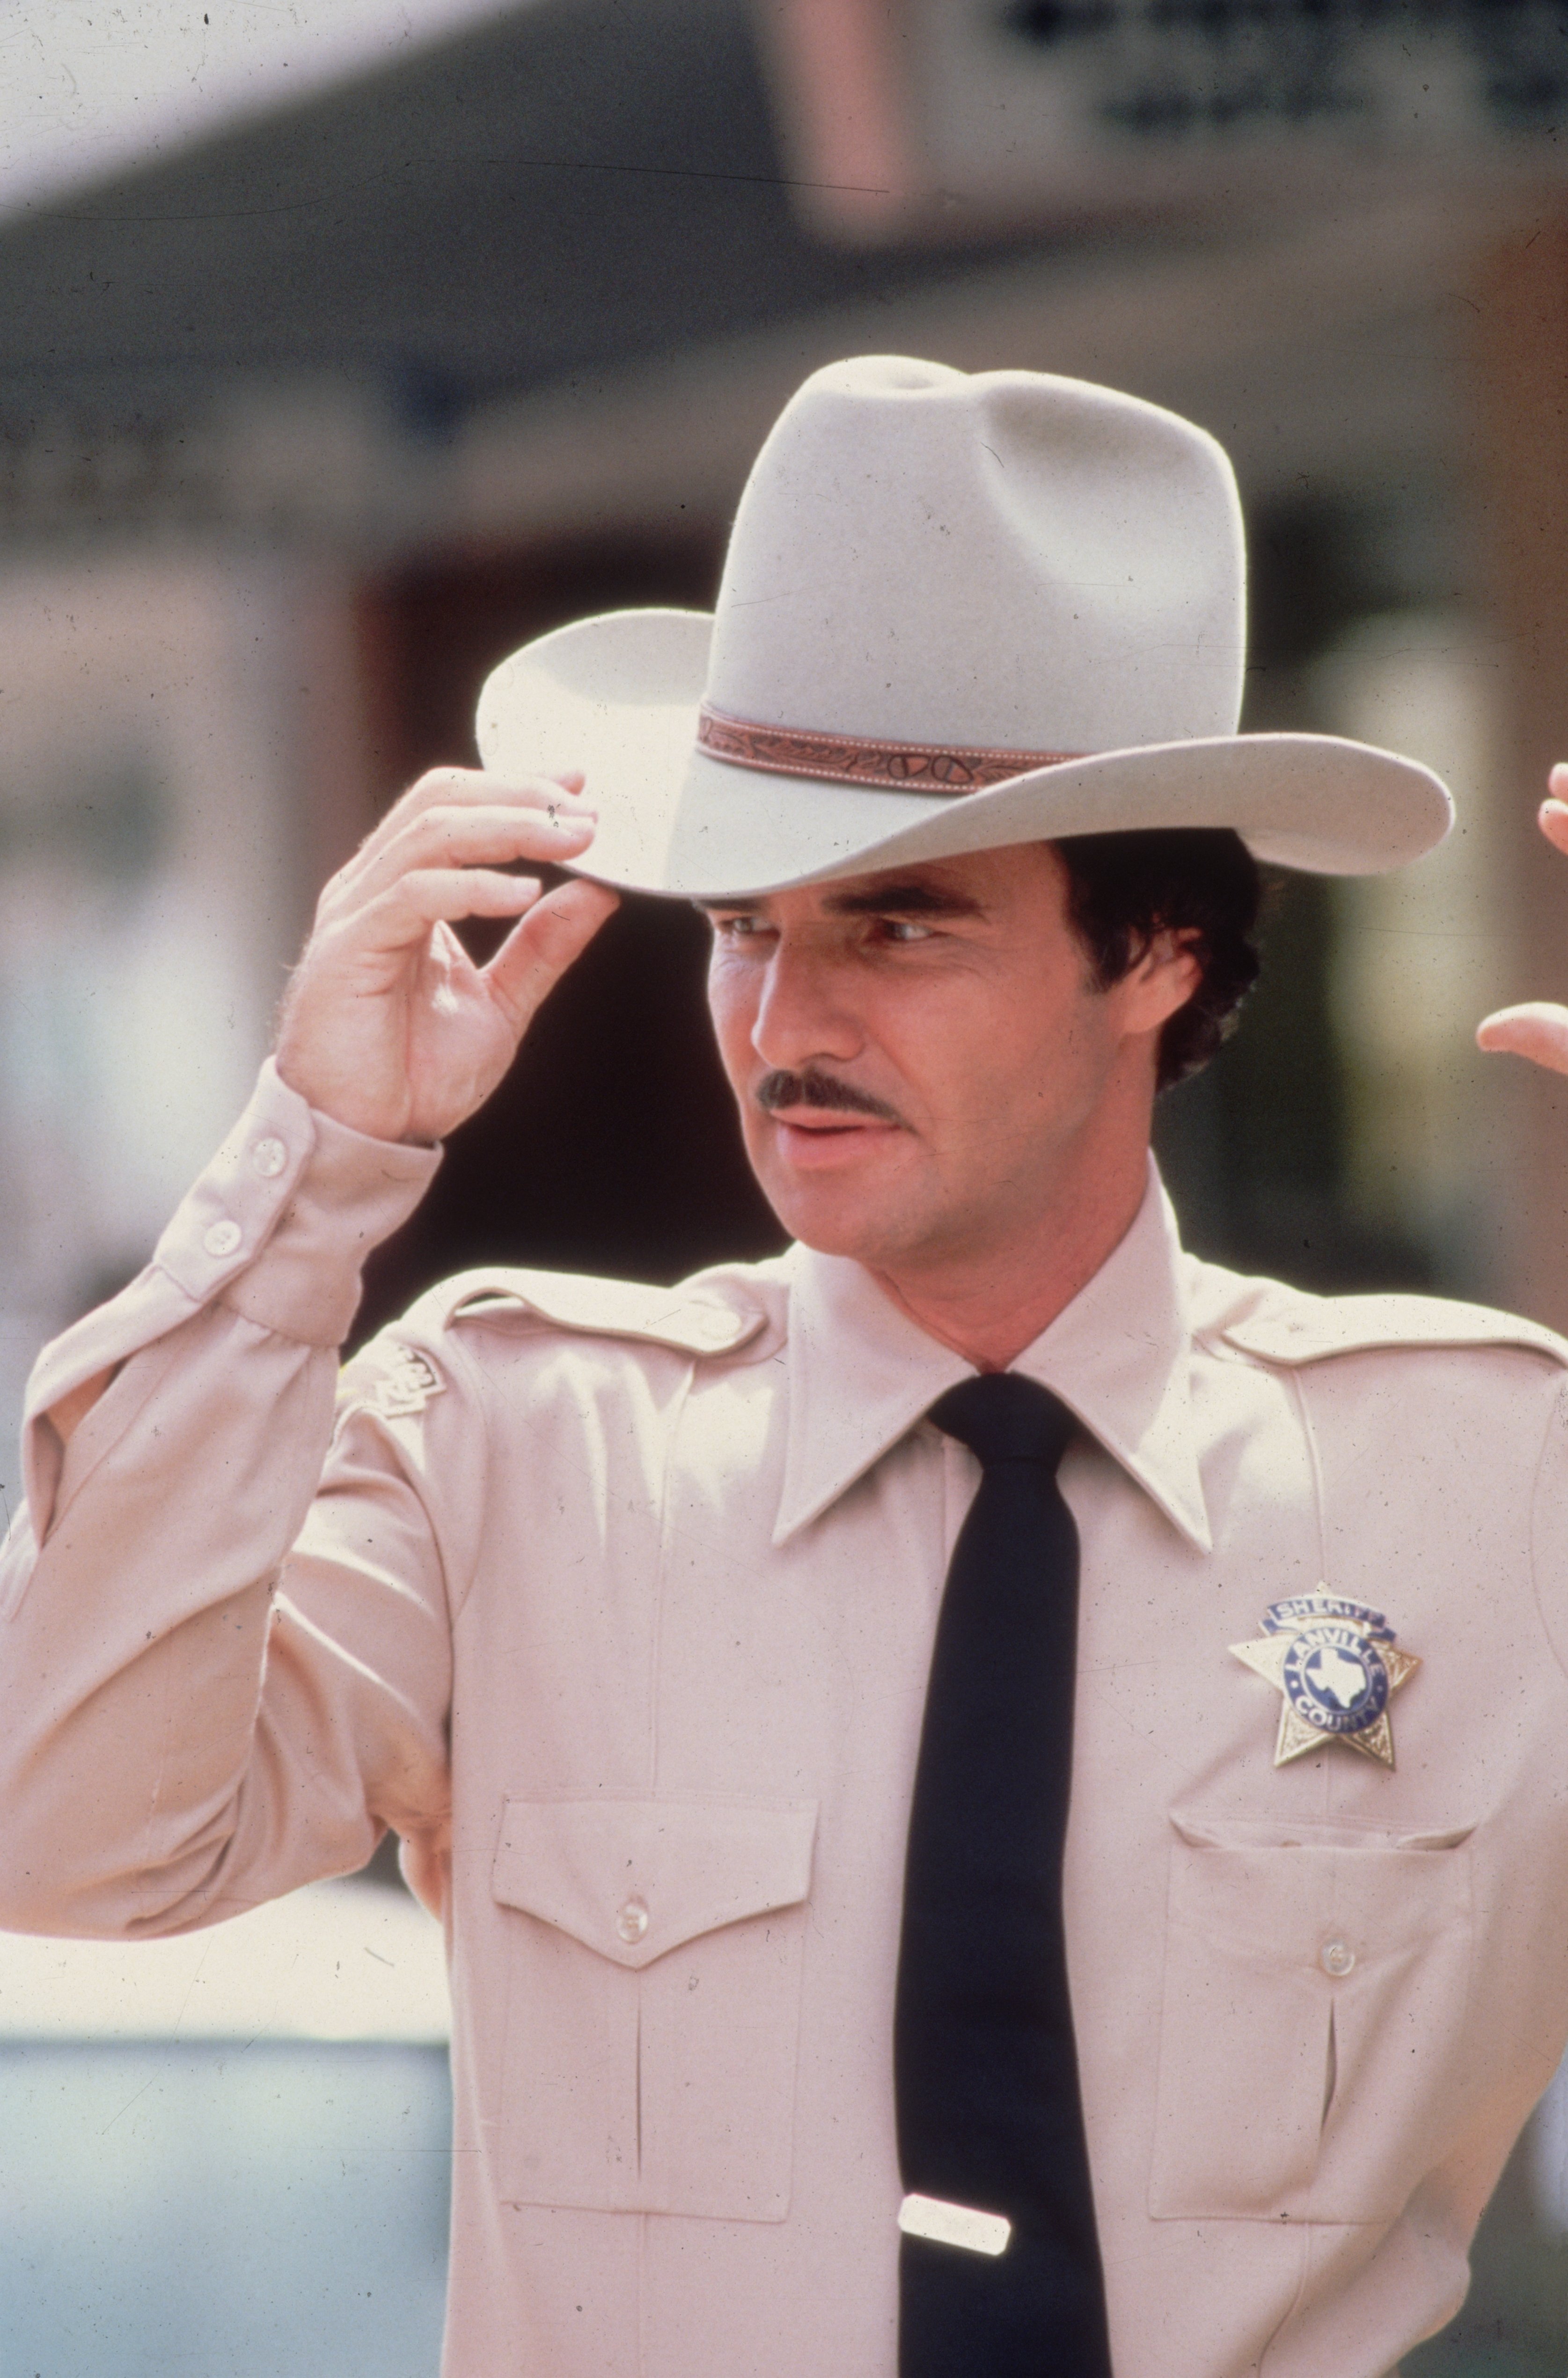 Film and television star Burt Reynolds as a sheriff. | Source: Getty Images